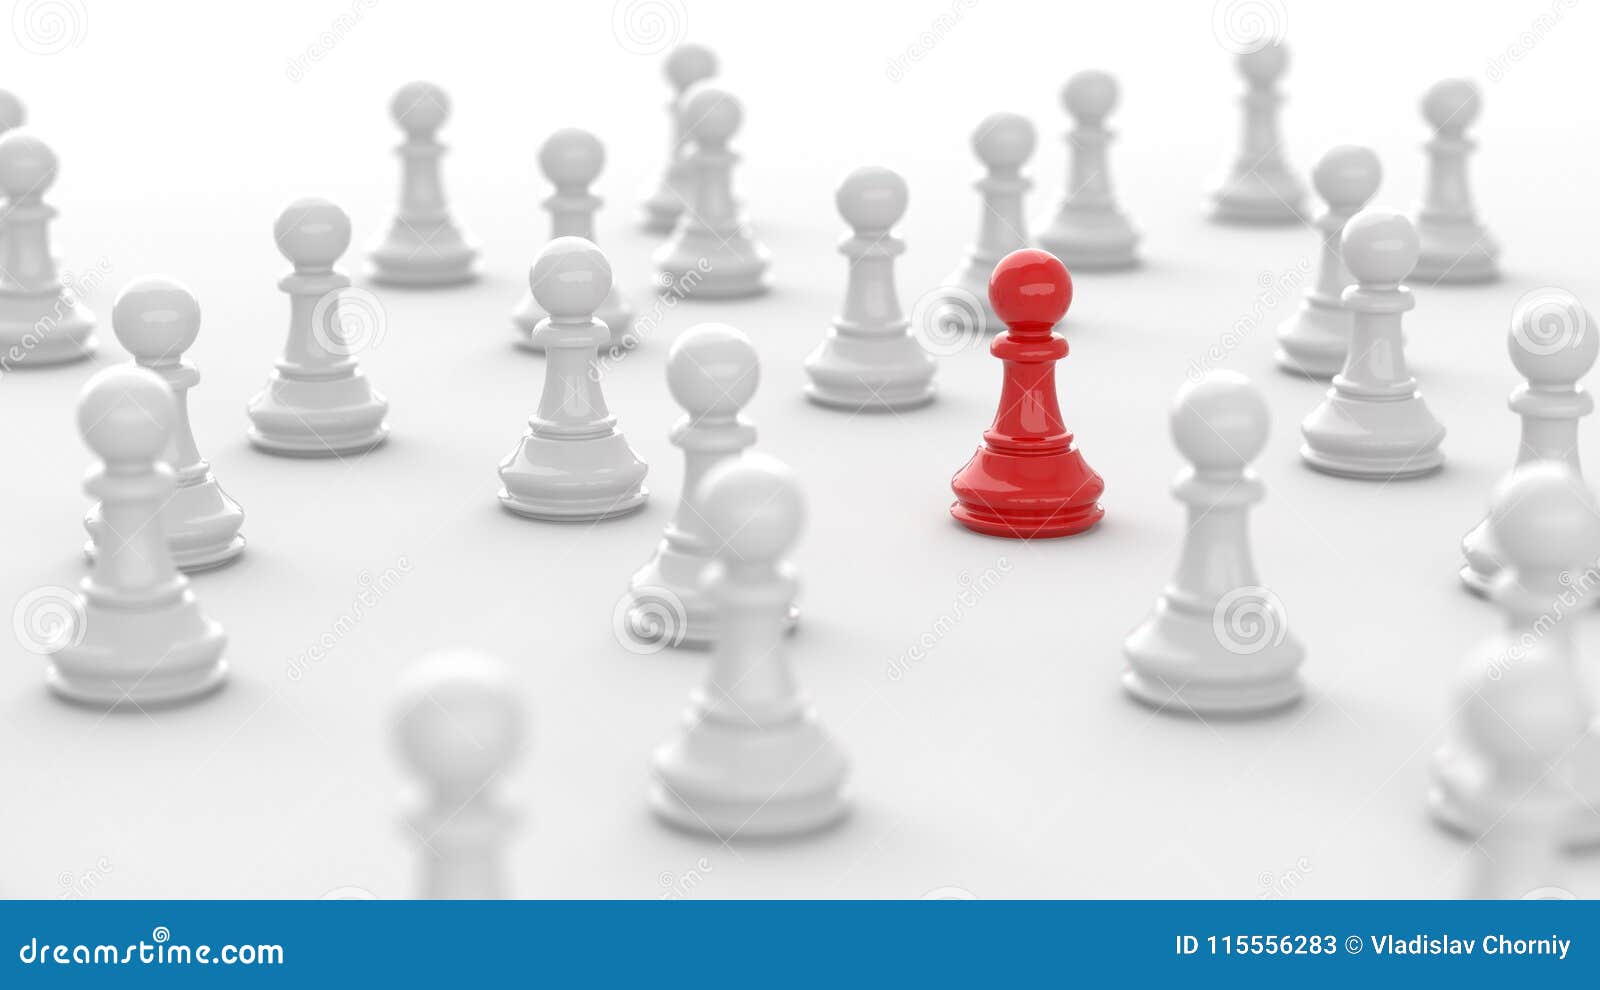 Red pawn of chess stock illustration. Illustration of crowd - 115556283